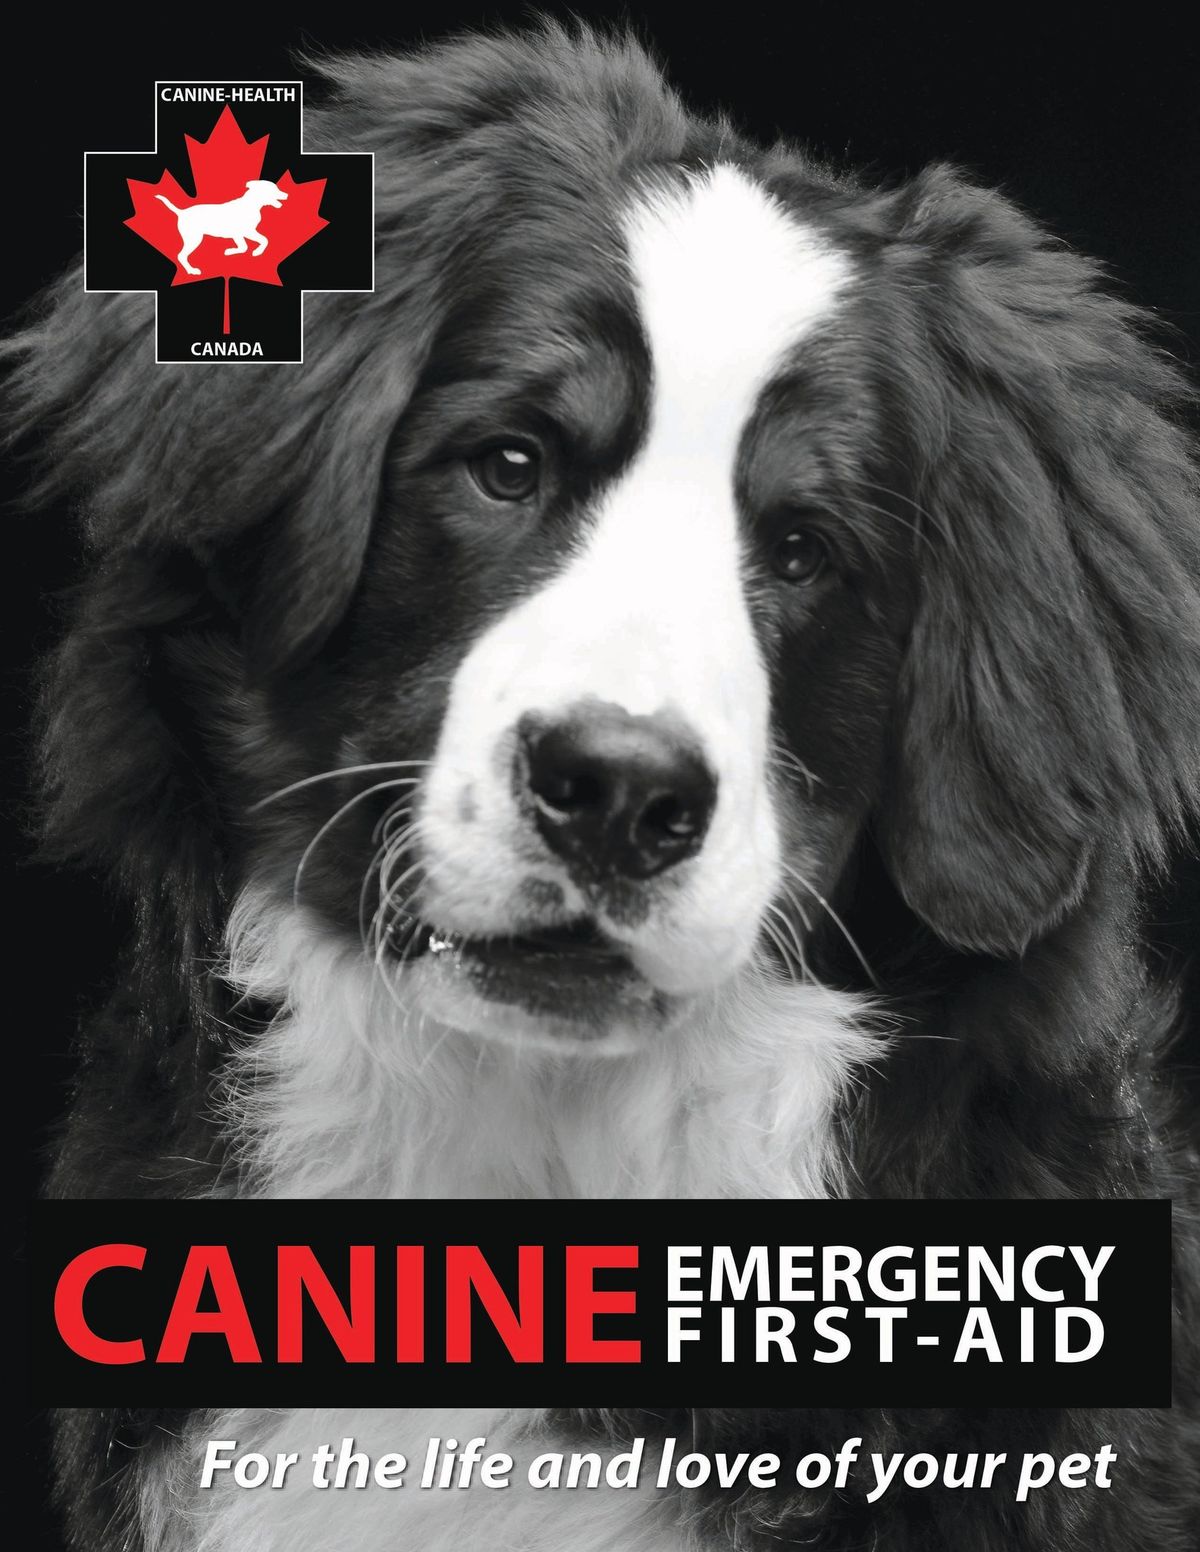 Canine Health and Emergency First Aid